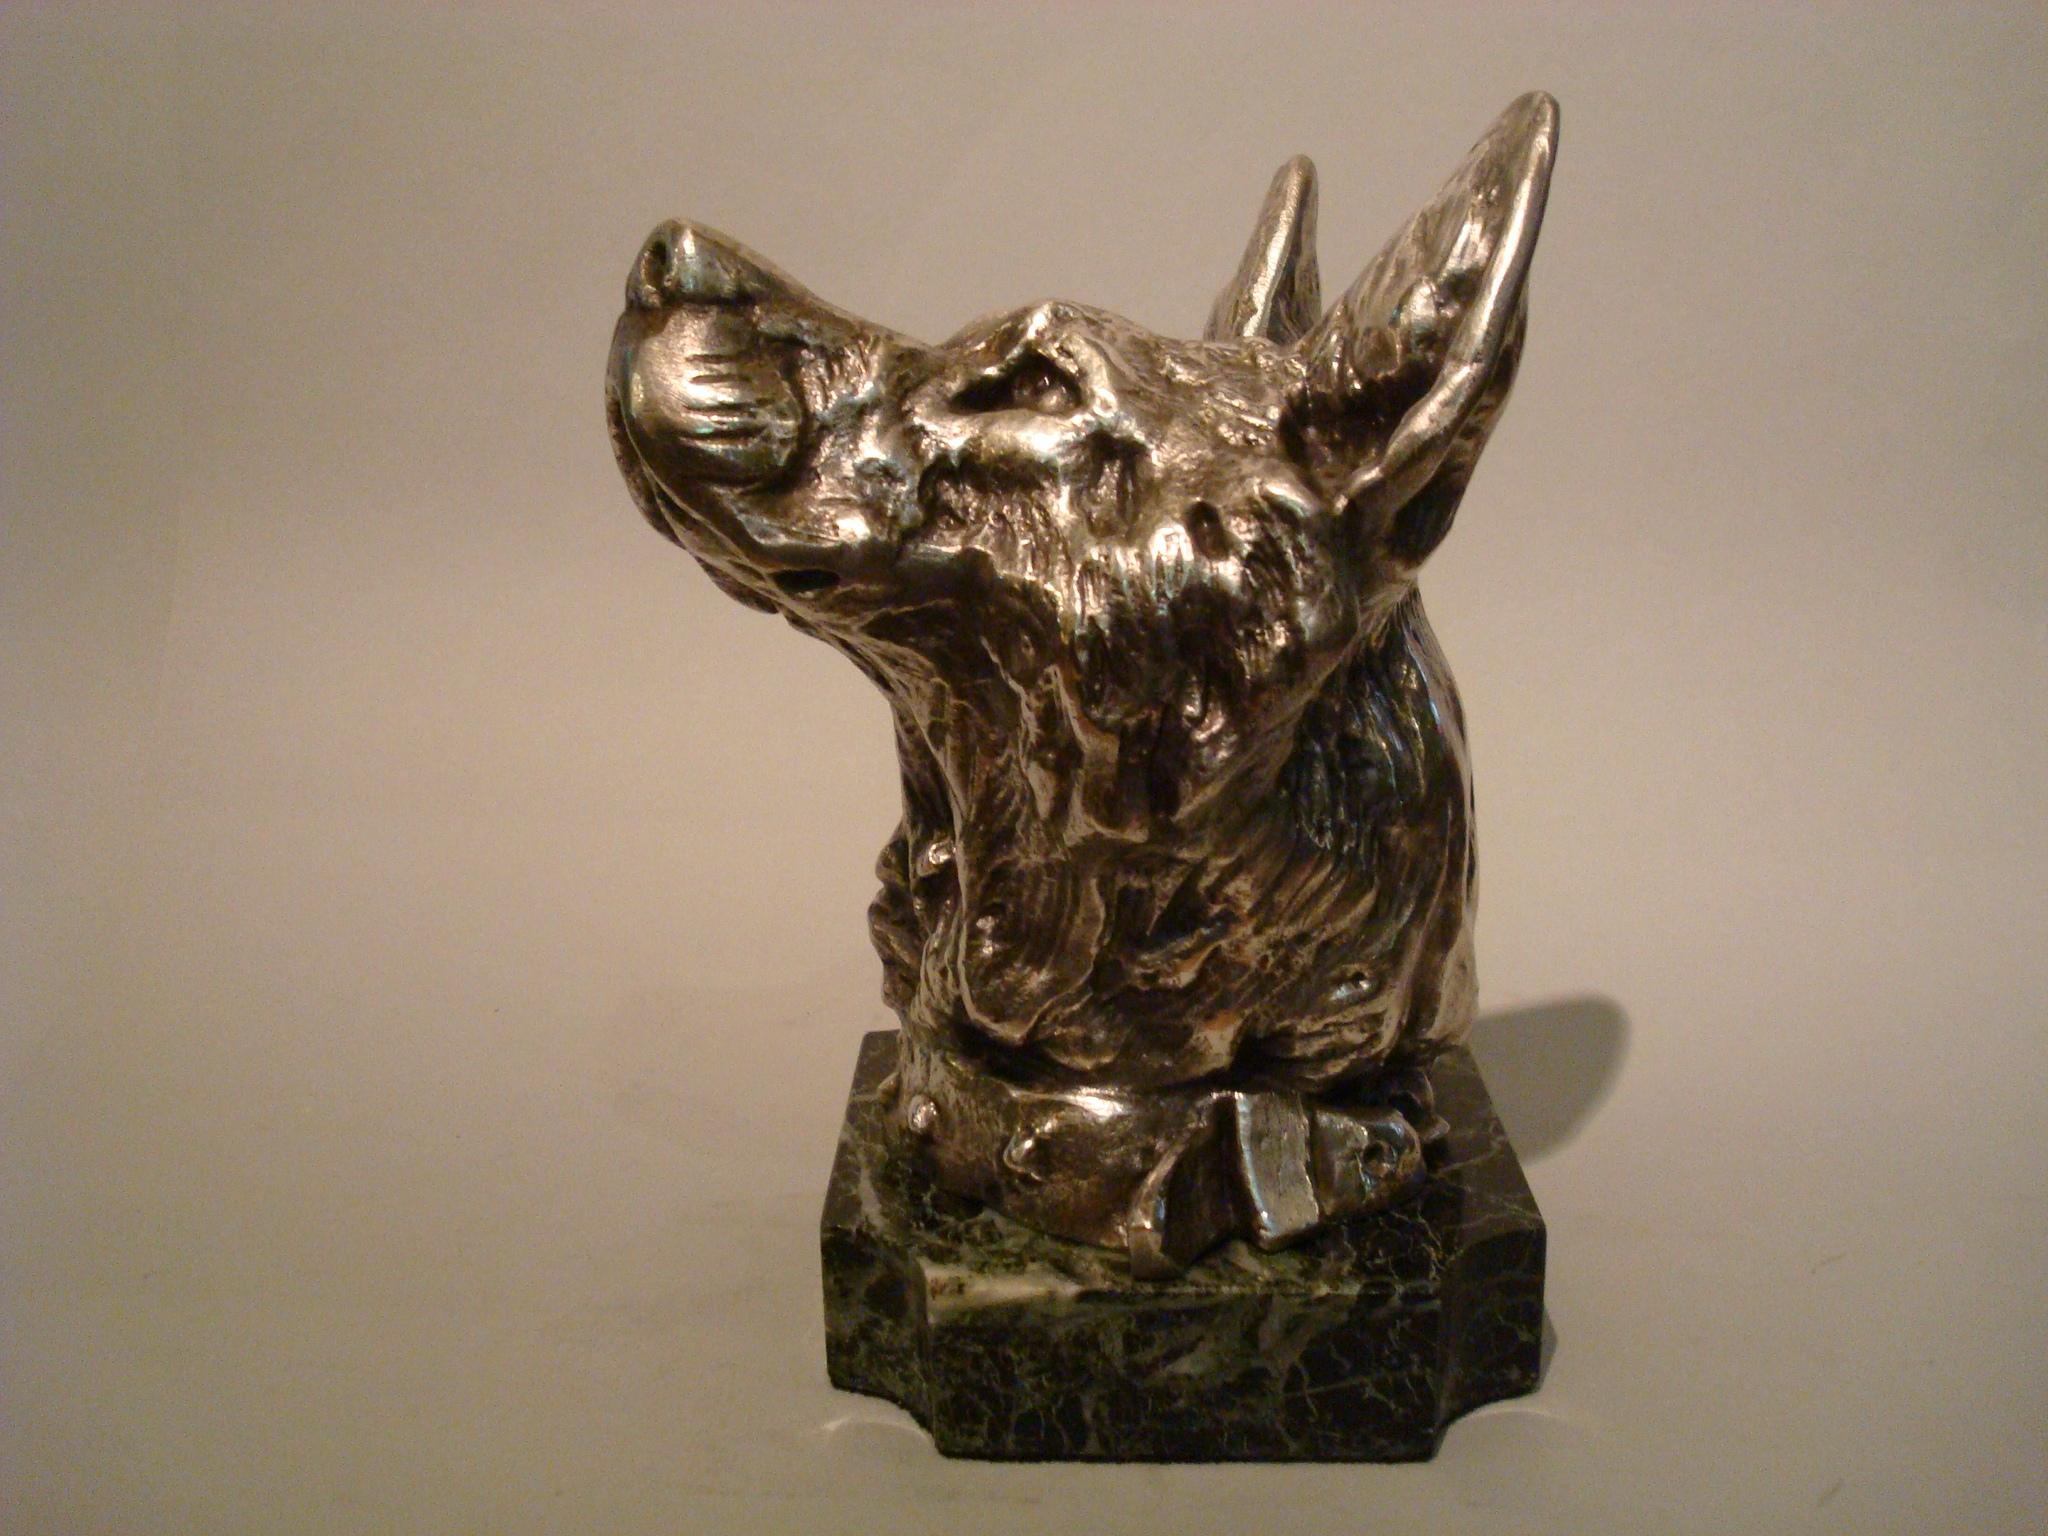 German shepherd dog bust paperweight sculpture / France, 1910. Foundry Mark coin. Signed H. Puyen. Silver plated metal mounted over a green marble.
Desk sculpture / paperweight. Fantastic details.